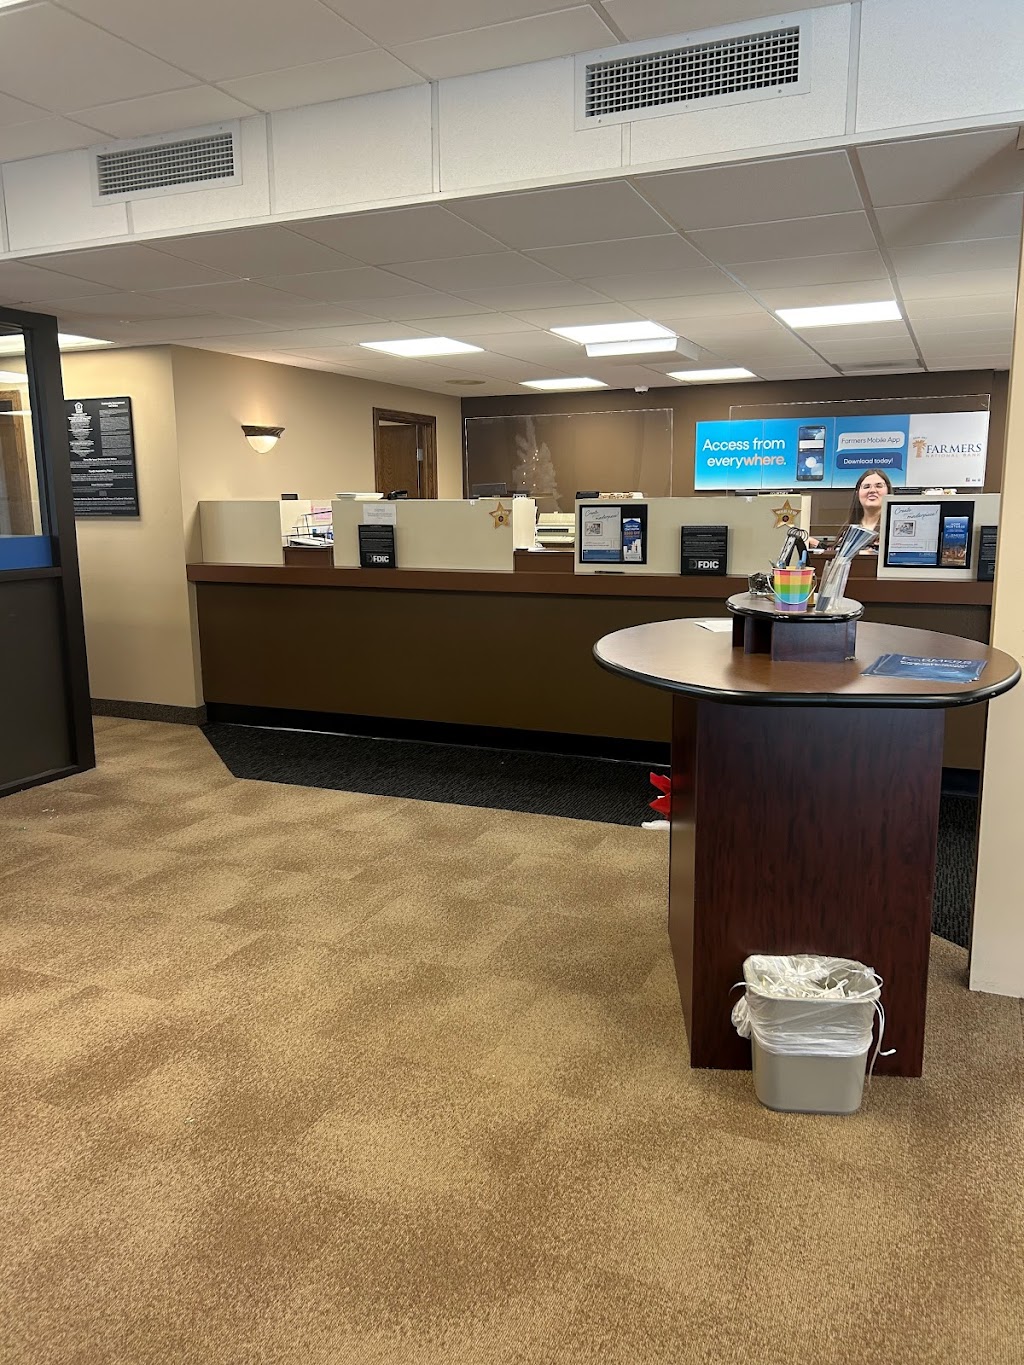 Farmers National Bank | 3619 S Meridian Rd, Youngstown, OH 44511, USA | Phone: (330) 793-3971